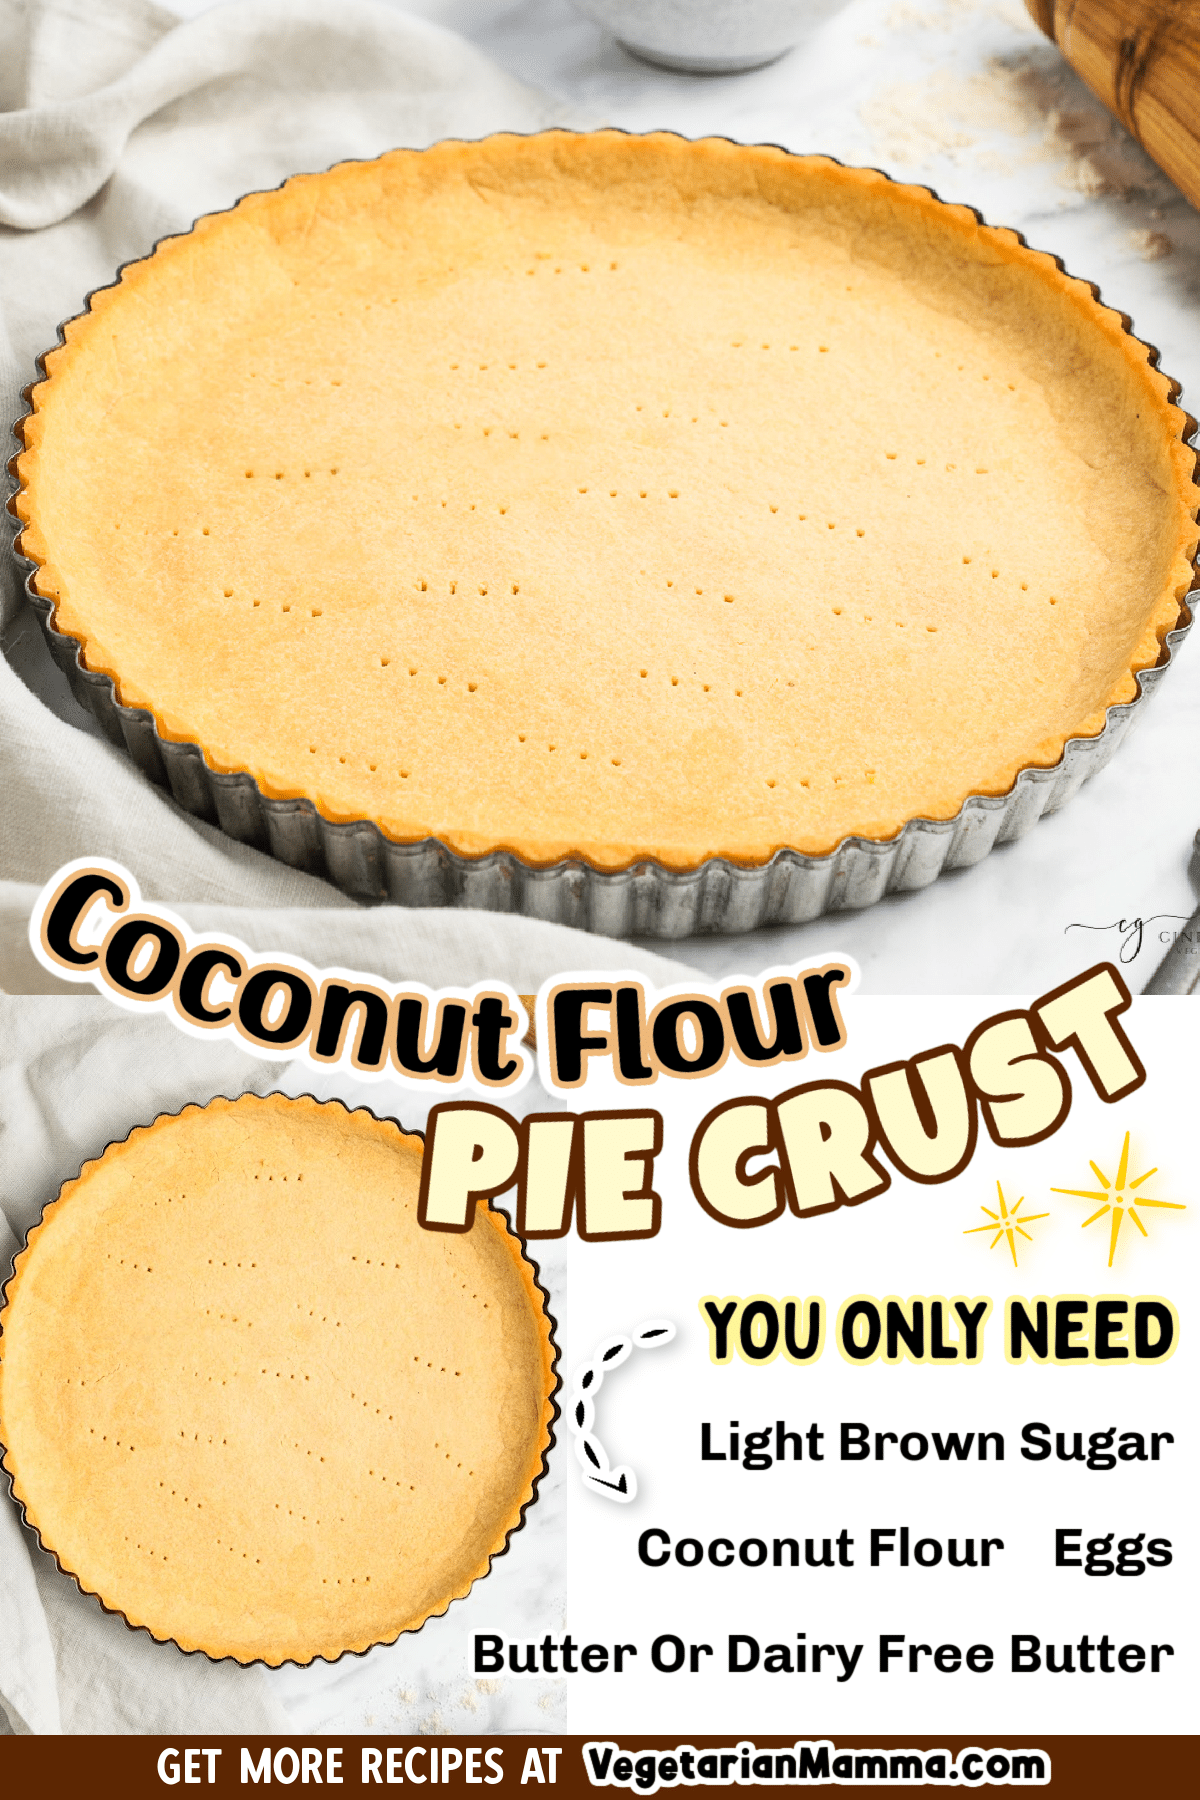 This easy, gluten-free, coconut flour pie crust is super simple to make, and will be the perfect base for all of your favorite pie fillings! You'll need just four ingredients to make this nut-free pie crust with coconut flour, and tips are included to make it sugar-free, vegan, dairy-free, low-carb, and keto too.